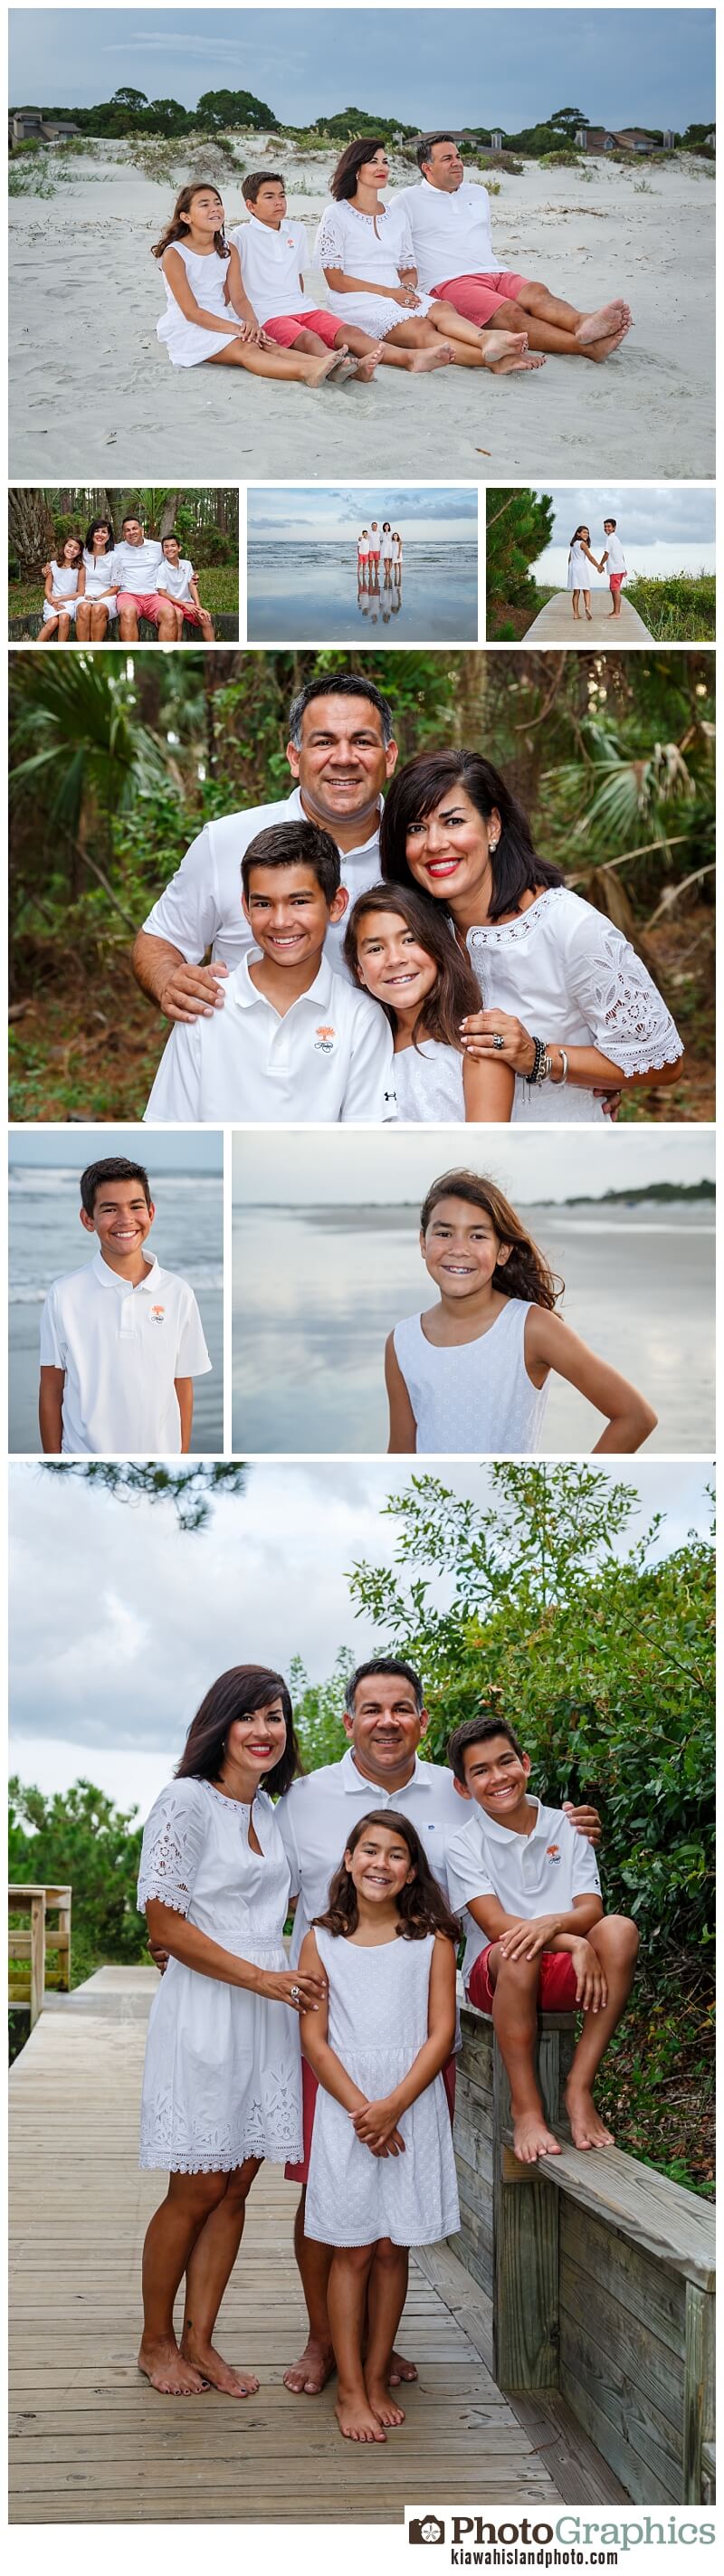 coordinating outfits family photo session on Kiawah Island